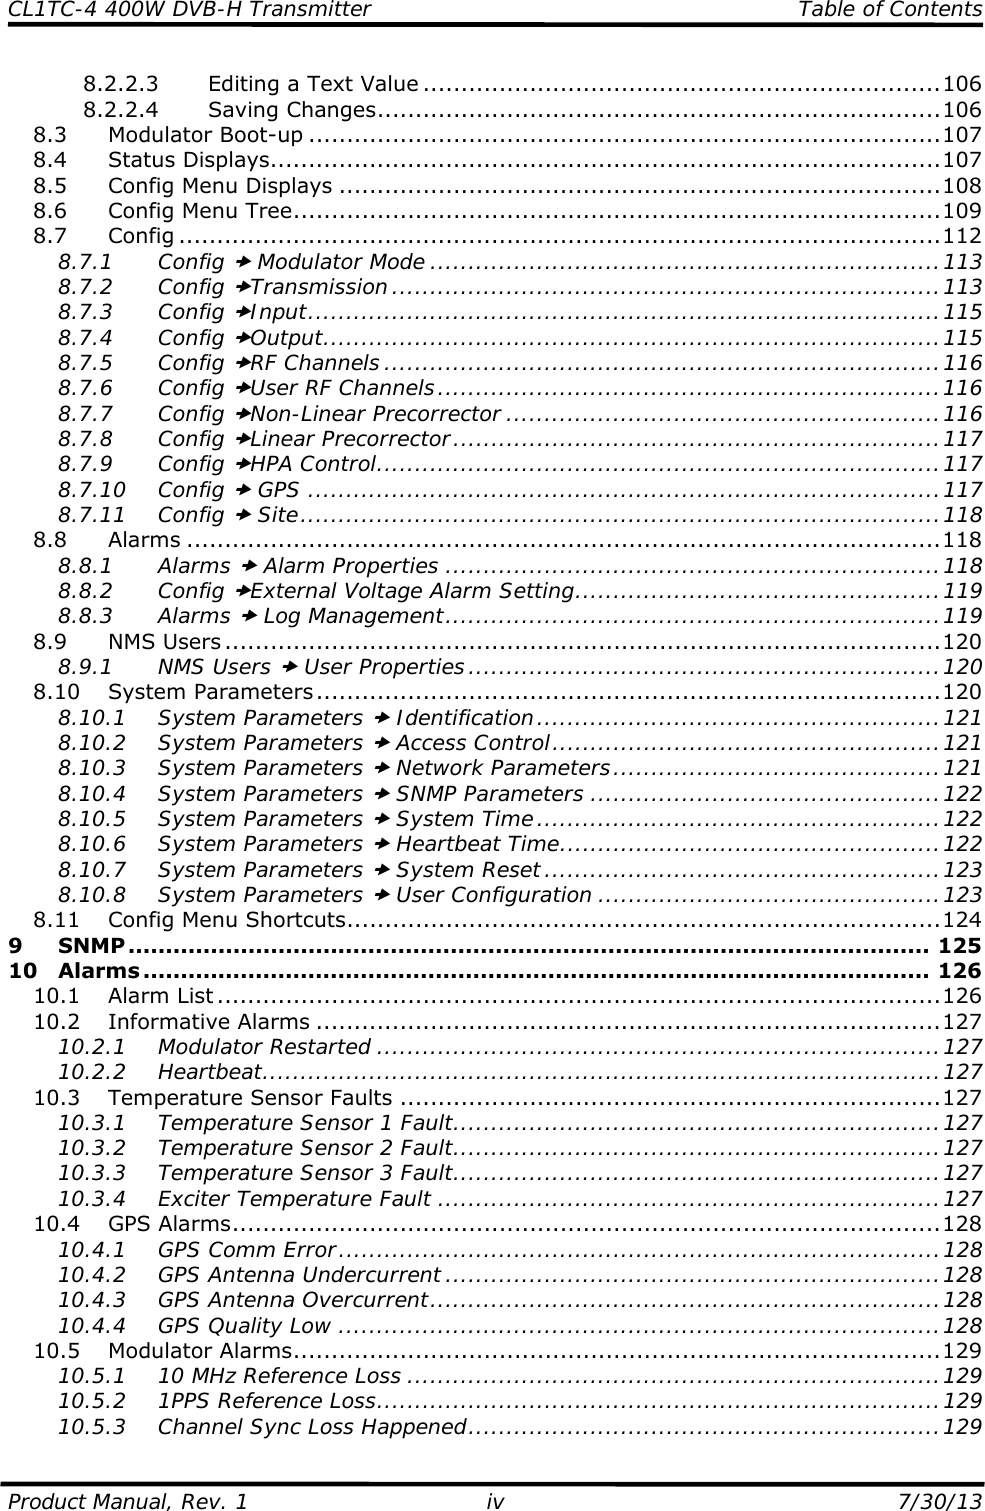 CL1TC-4 400W DVB-H Transmitter   Table of Contents  Product Manual, Rev. 1  iv  7/30/13 8.2.2.3 Editing a Text Value ....................................................................106 8.2.2.4 Saving Changes..........................................................................106 8.3 Modulator Boot-up ...................................................................................107 8.4 Status Displays........................................................................................107 8.5 Config Menu Displays ...............................................................................108 8.6 Config Menu Tree.....................................................................................109 8.7 Config ....................................................................................................112 8.7.1 Config x Modulator Mode ...................................................................113 8.7.2 Config xTransmission ........................................................................113 8.7.3 Config xInput...................................................................................115 8.7.4 Config xOutput.................................................................................115 8.7.5 Config xRF Channels .........................................................................116 8.7.6 Config xUser RF Channels..................................................................116 8.7.7 Config xNon-Linear Precorrector .........................................................116 8.7.8 Config xLinear Precorrector................................................................117 8.7.9 Config xHPA Control..........................................................................117 8.7.10 Config x GPS ...................................................................................117 8.7.11 Config x Site....................................................................................118 8.8 Alarms ...................................................................................................118 8.8.1 Alarms x Alarm Properties .................................................................118 8.8.2 Config xExternal Voltage Alarm Setting................................................119 8.8.3 Alarms x Log Management.................................................................119 8.9 NMS Users ..............................................................................................120 8.9.1 NMS Users x User Properties..............................................................120 8.10 System Parameters..................................................................................120 8.10.1 System Parameters x Identification.....................................................121 8.10.2 System Parameters x Access Control...................................................121 8.10.3 System Parameters x Network Parameters...........................................121 8.10.4 System Parameters x SNMP Parameters ..............................................122 8.10.5 System Parameters x System Time.....................................................122 8.10.6 System Parameters x Heartbeat Time..................................................122 8.10.7 System Parameters x System Reset....................................................123 8.10.8 System Parameters x User Configuration .............................................123 8.11 Config Menu Shortcuts..............................................................................124 9 SNMP........................................................................................................... 125 10 Alarms ......................................................................................................... 126 10.1 Alarm List ...............................................................................................126 10.2 Informative Alarms ..................................................................................127 10.2.1 Modulator Restarted ..........................................................................127 10.2.2 Heartbeat.........................................................................................127 10.3 Temperature Sensor Faults .......................................................................127 10.3.1 Temperature Sensor 1 Fault................................................................127 10.3.2 Temperature Sensor 2 Fault................................................................127 10.3.3 Temperature Sensor 3 Fault................................................................127 10.3.4 Exciter Temperature Fault ..................................................................127 10.4 GPS Alarms.............................................................................................128 10.4.1 GPS Comm Error...............................................................................128 10.4.2 GPS Antenna Undercurrent .................................................................128 10.4.3 GPS Antenna Overcurrent...................................................................128 10.4.4 GPS Quality Low ...............................................................................128 10.5 Modulator Alarms.....................................................................................129 10.5.1 10 MHz Reference Loss ......................................................................129 10.5.2 1PPS Reference Loss..........................................................................129 10.5.3 Channel Sync Loss Happened..............................................................129 